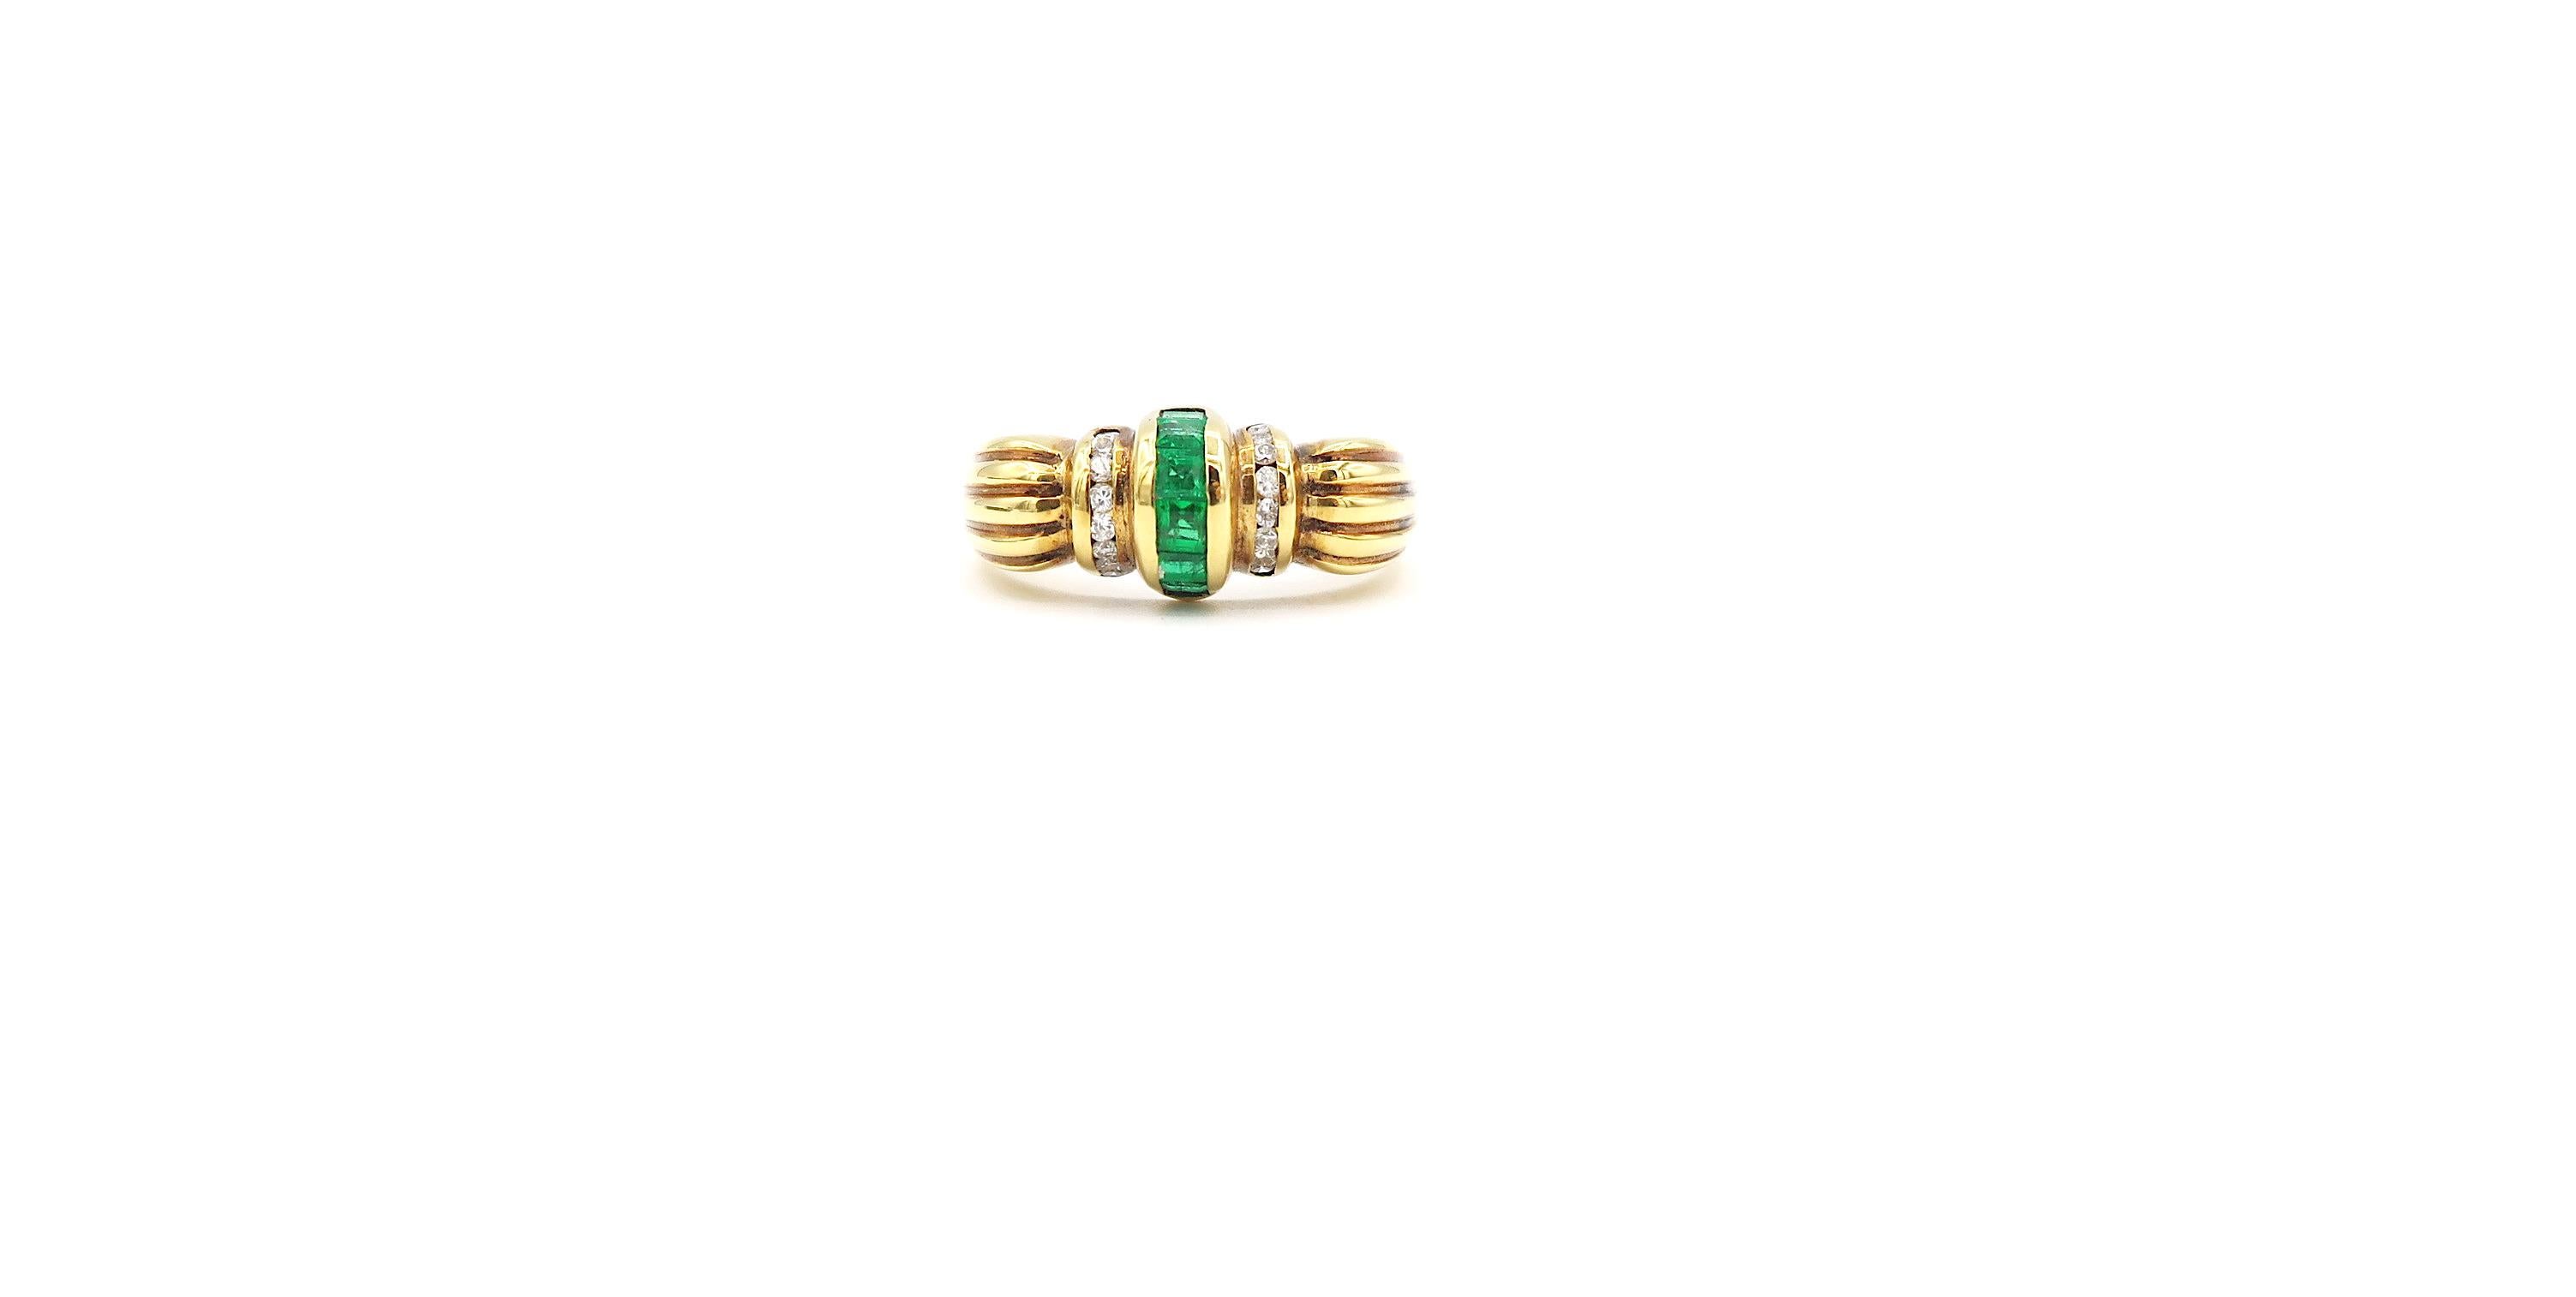 Fluted Curved Emerald and Diamond 18 Karat Yellow Gold Ring

Please let us know upon checkout if you wish to have the ring resized.

Ring size: US 7, UK N

Gold: 6.01g.
Emerald: 050ct.
Diamond: 0.20ct.